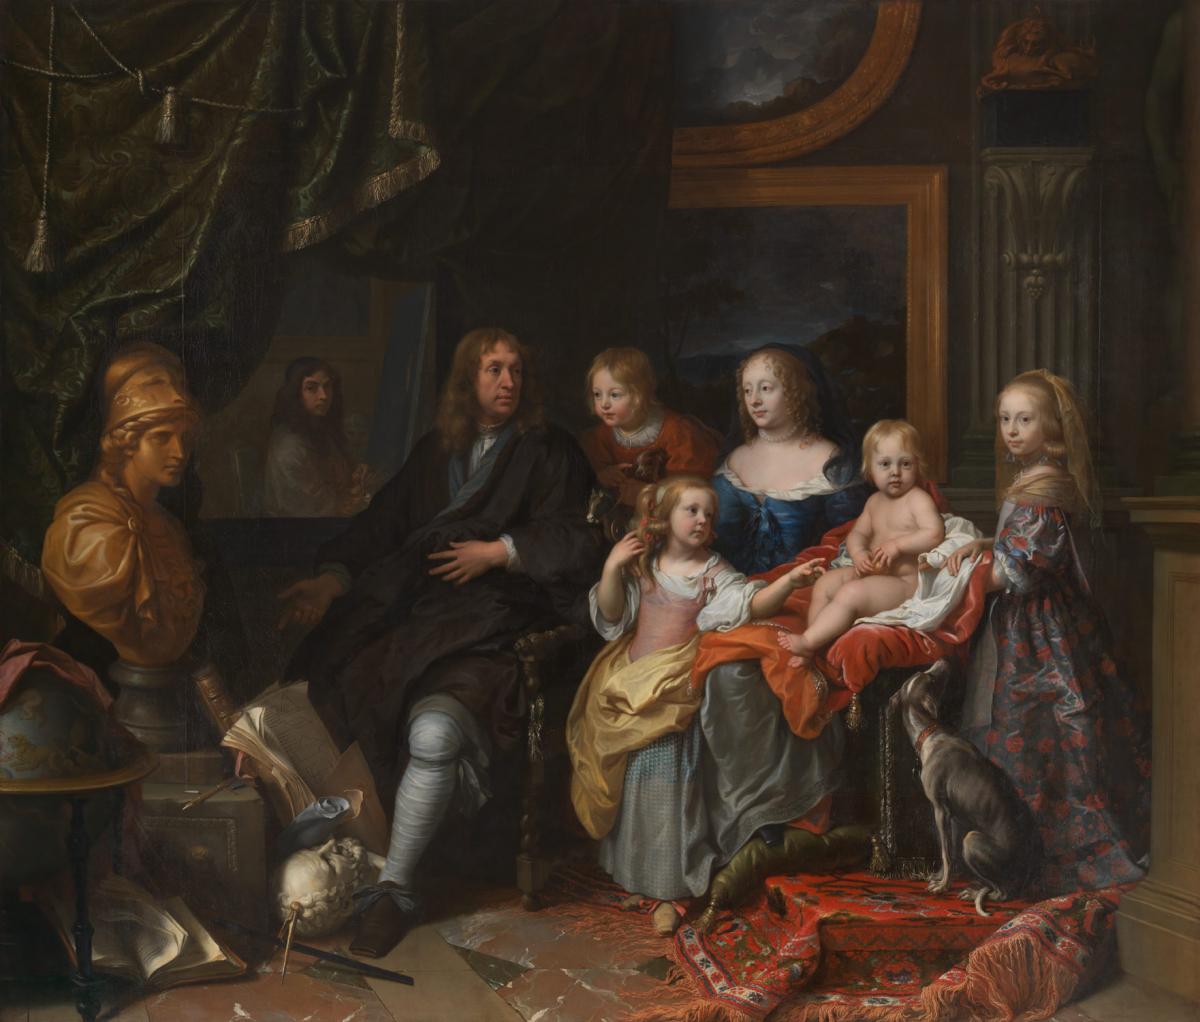 Everhard Jabach and His Family painting by Charles Le Burn